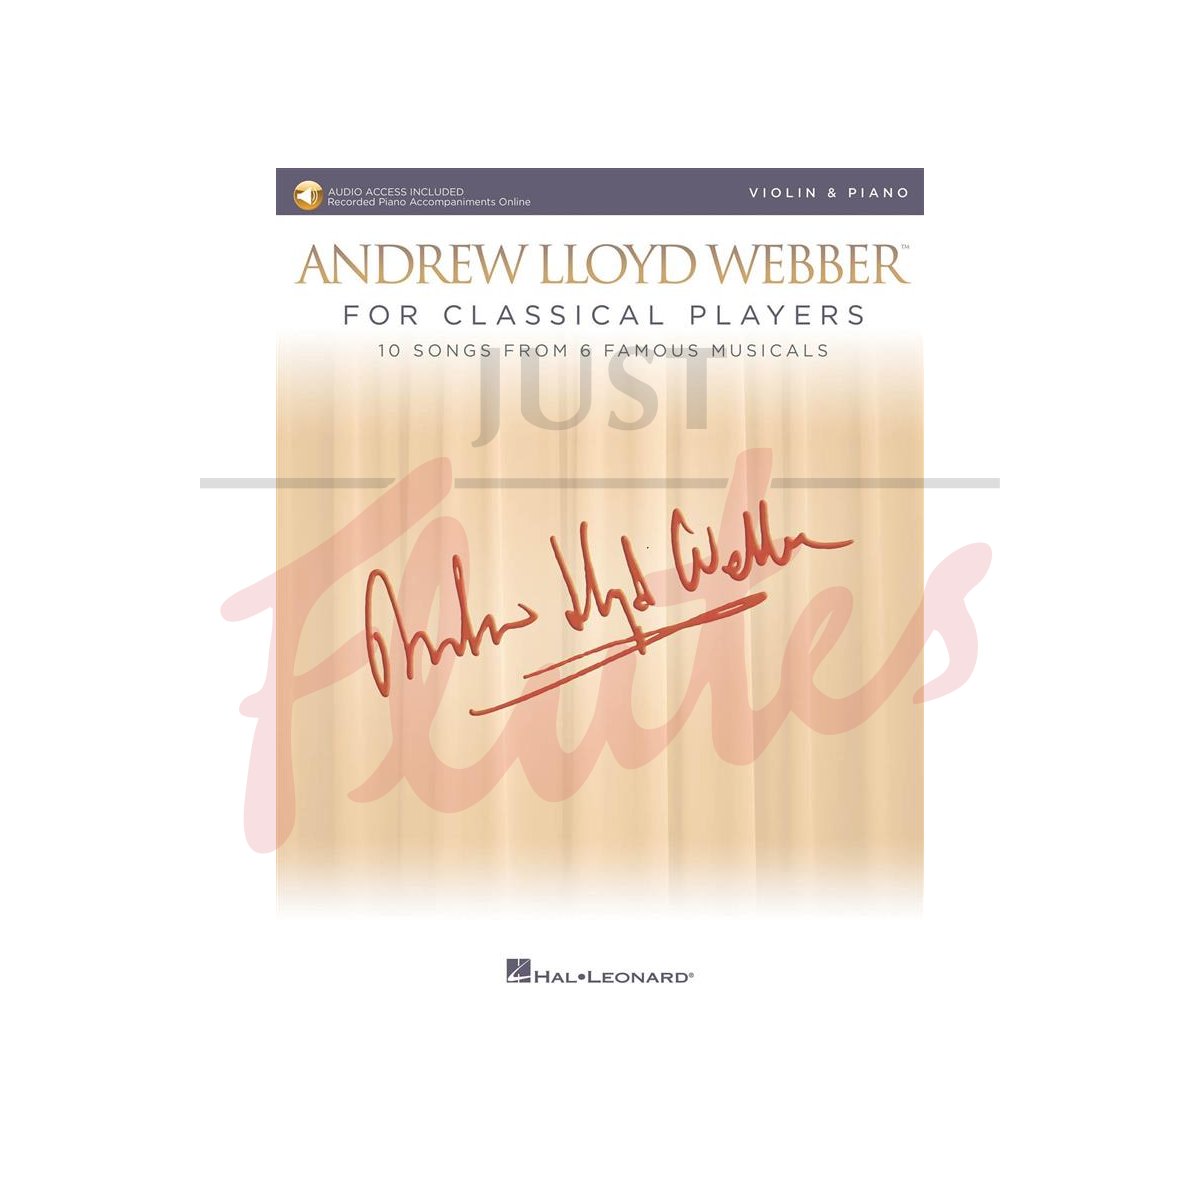 Andrew Lloyd Webber for Classical Players [Violin]